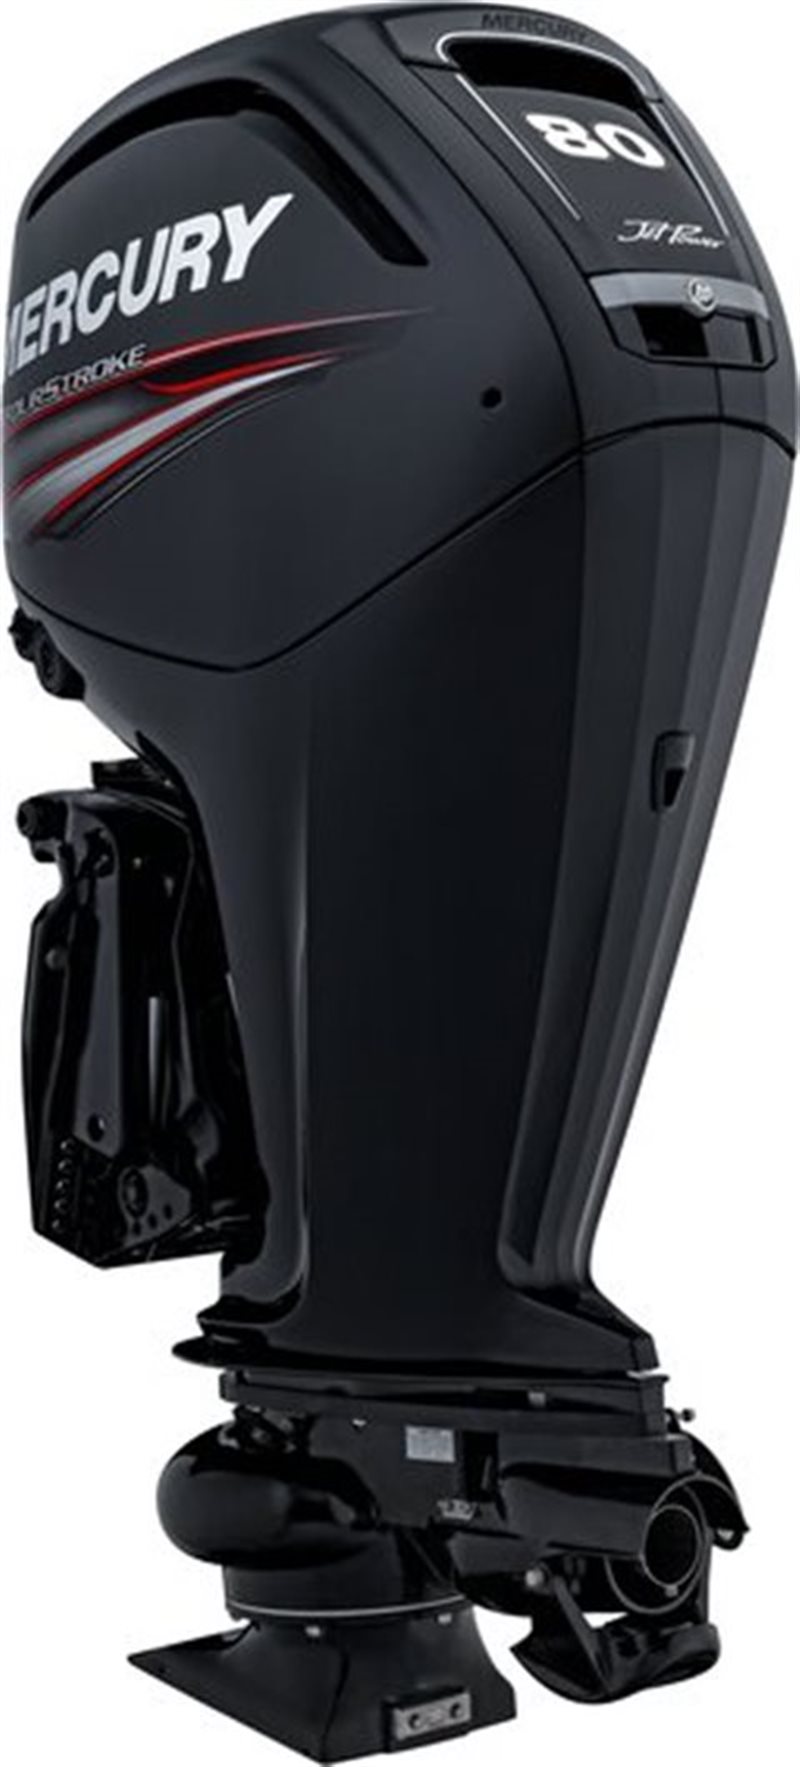 2021 Mercury Outboard FourStroke Jet Outboards 25-80 hp 80 hp Jet FourStroke at Fort Fremont Marine